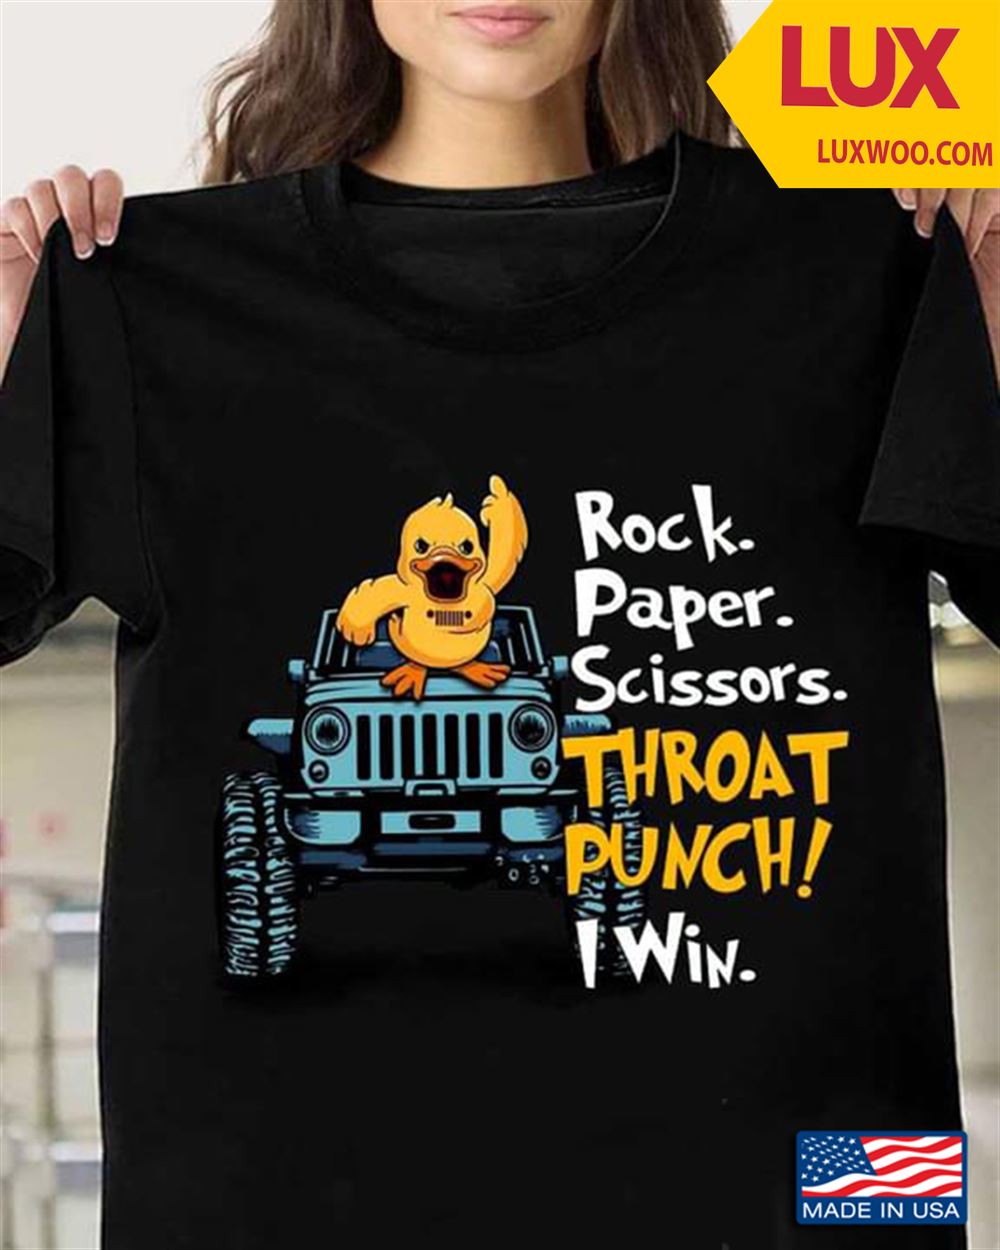 Rock Paper Scissors Throat Punch I Win Jeep And Duck Tshirt Size Up To 5xl